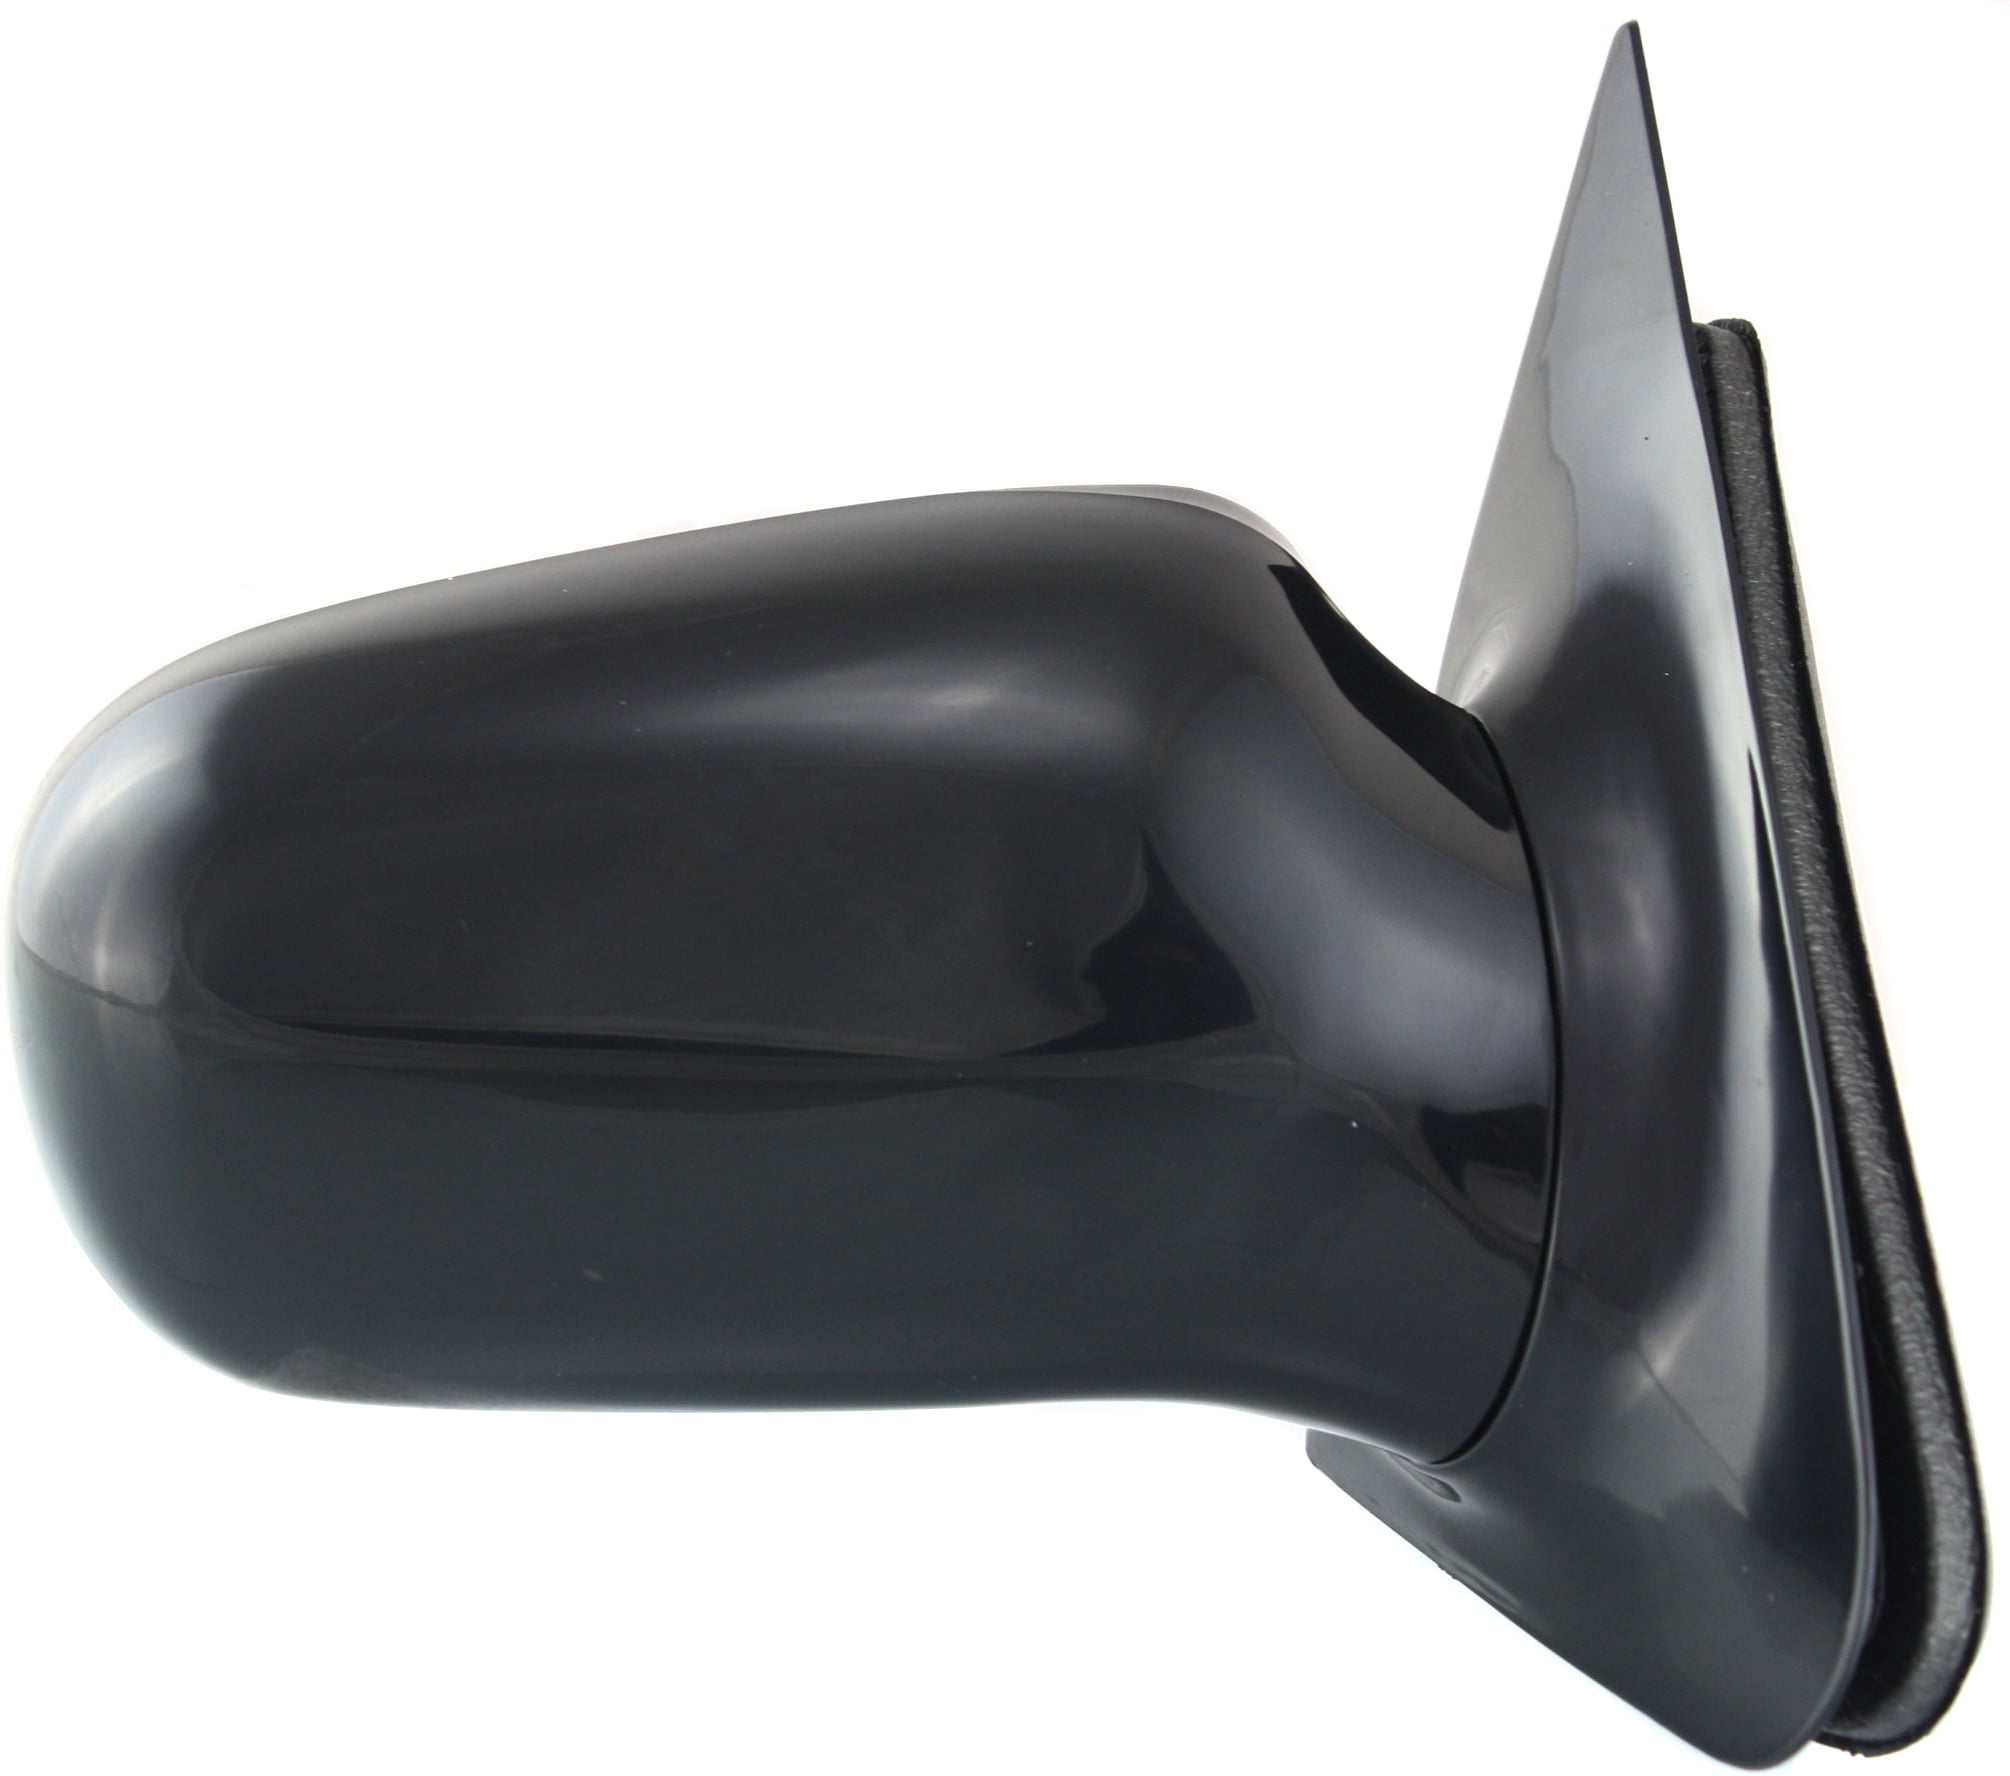 Drivers Manual Remote Side View Mirror Replacement for Chevrolet Cavalier Pontiac Sunfire 10362467 AutoAndArt 